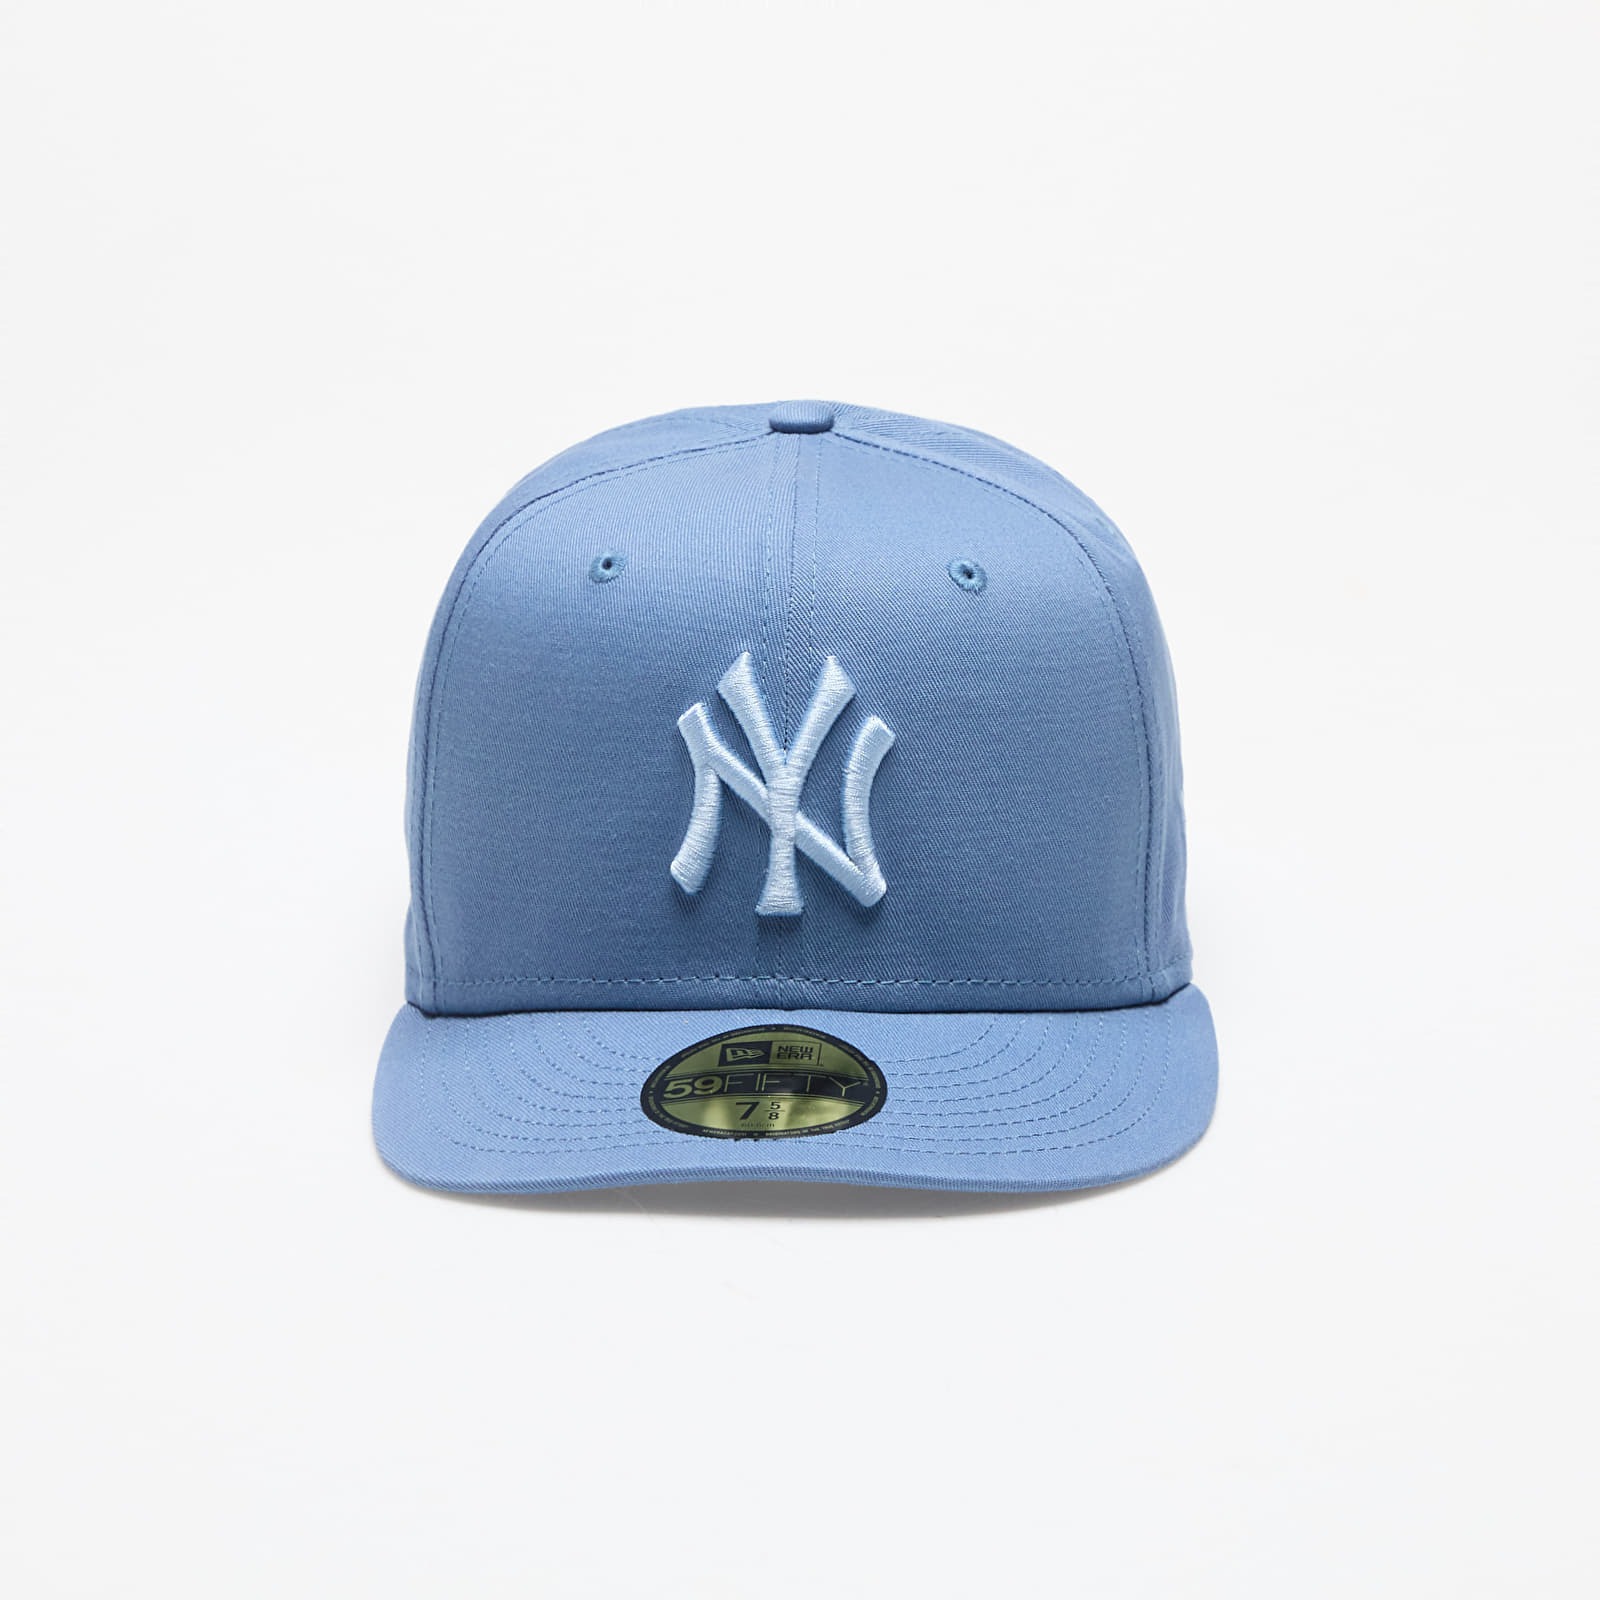 New Era New York Yankees 59Fifty Fitted Cap Faded Blue/ Baby Blue - unisex - Size: 7 1/2